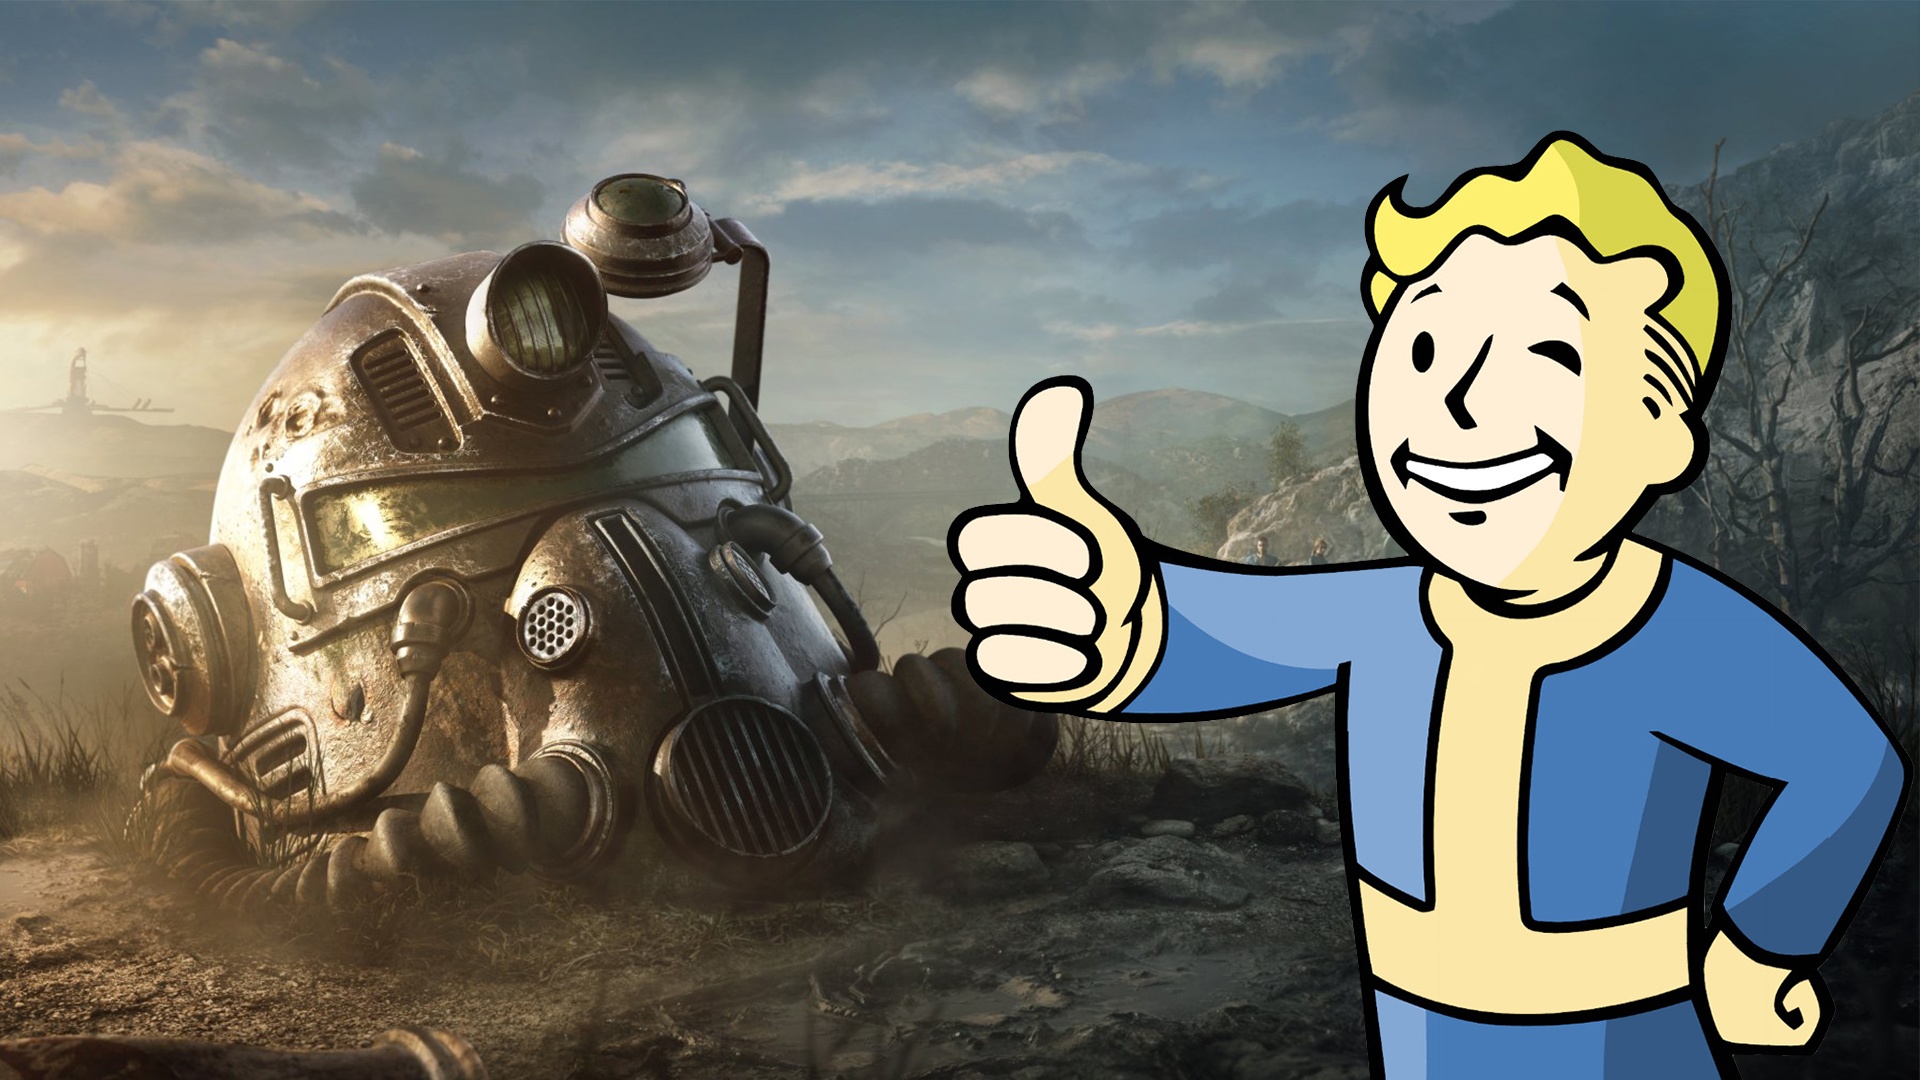 Exclusive: Amazon Prime's "Fallout" series based on the popular video game will debut in 2024 